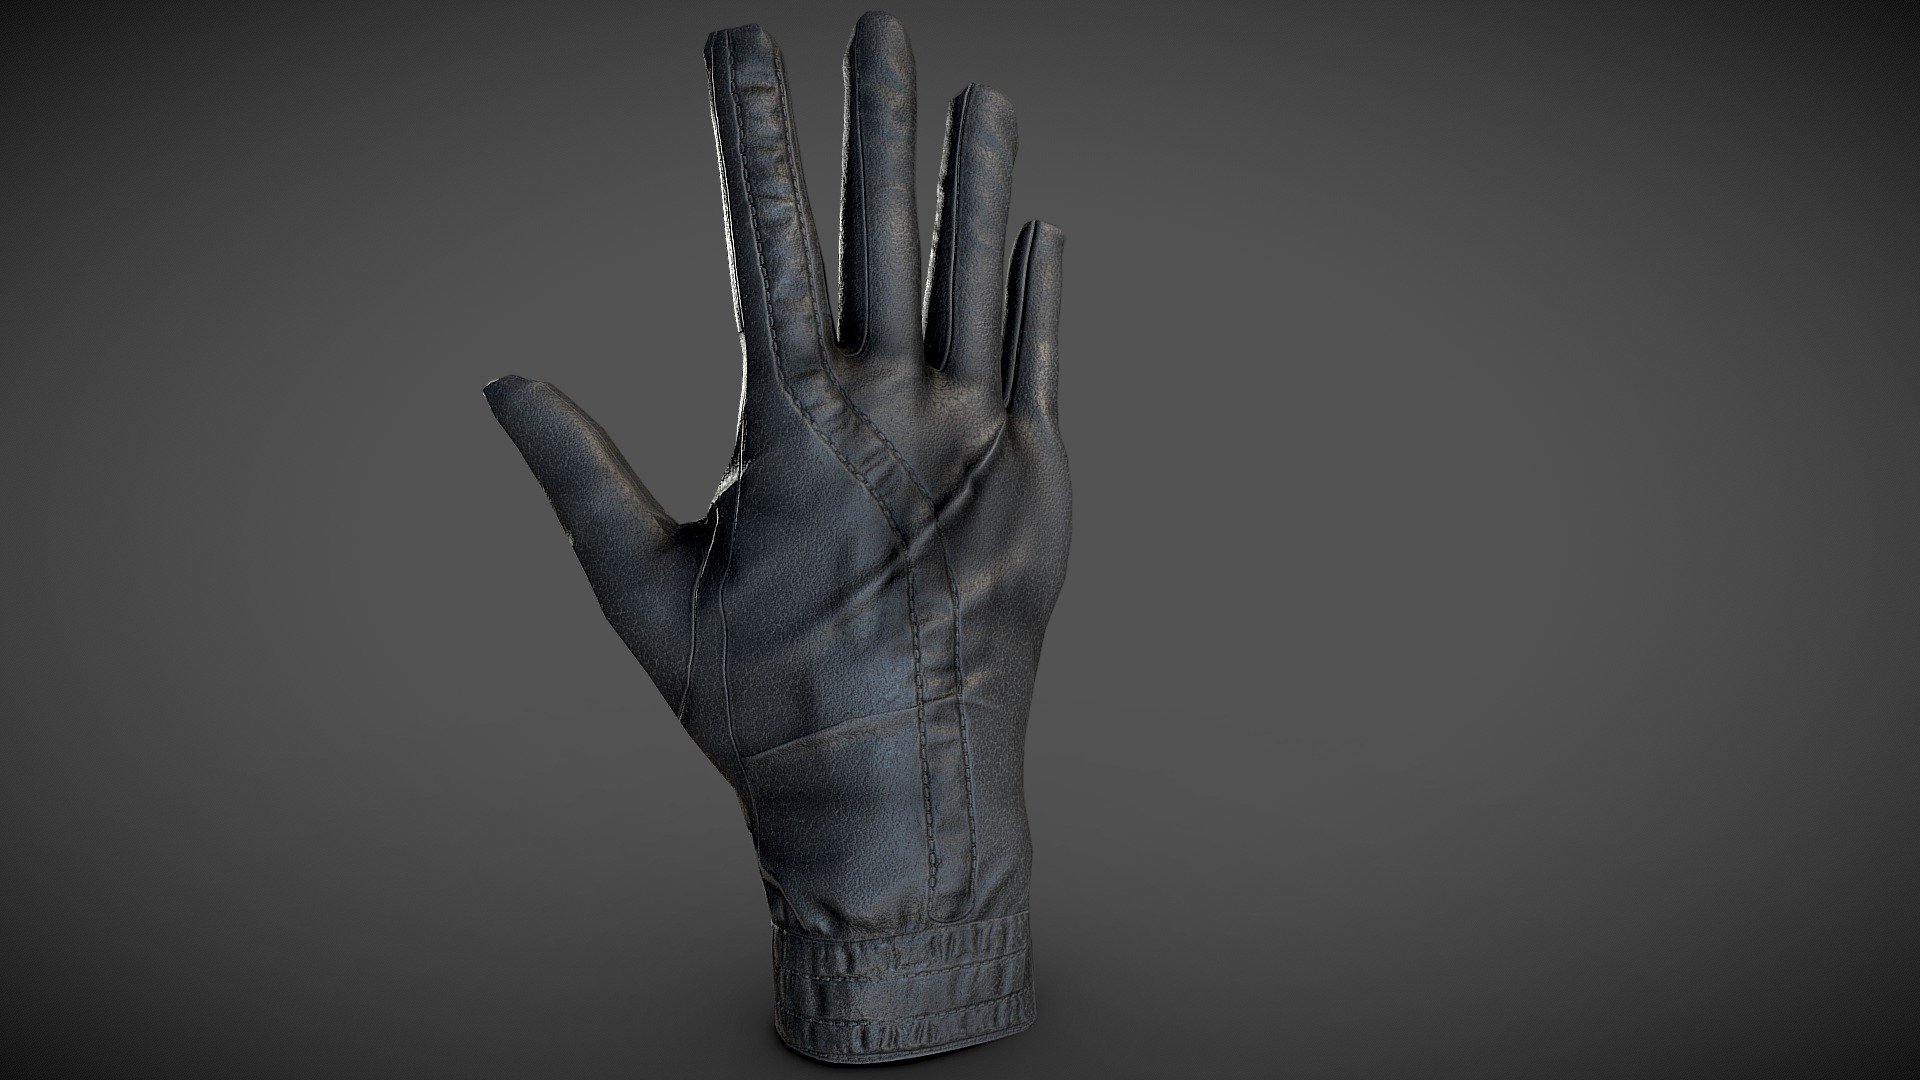 Black Leather Glove Download Free 3d Model By Shedmon C954a61